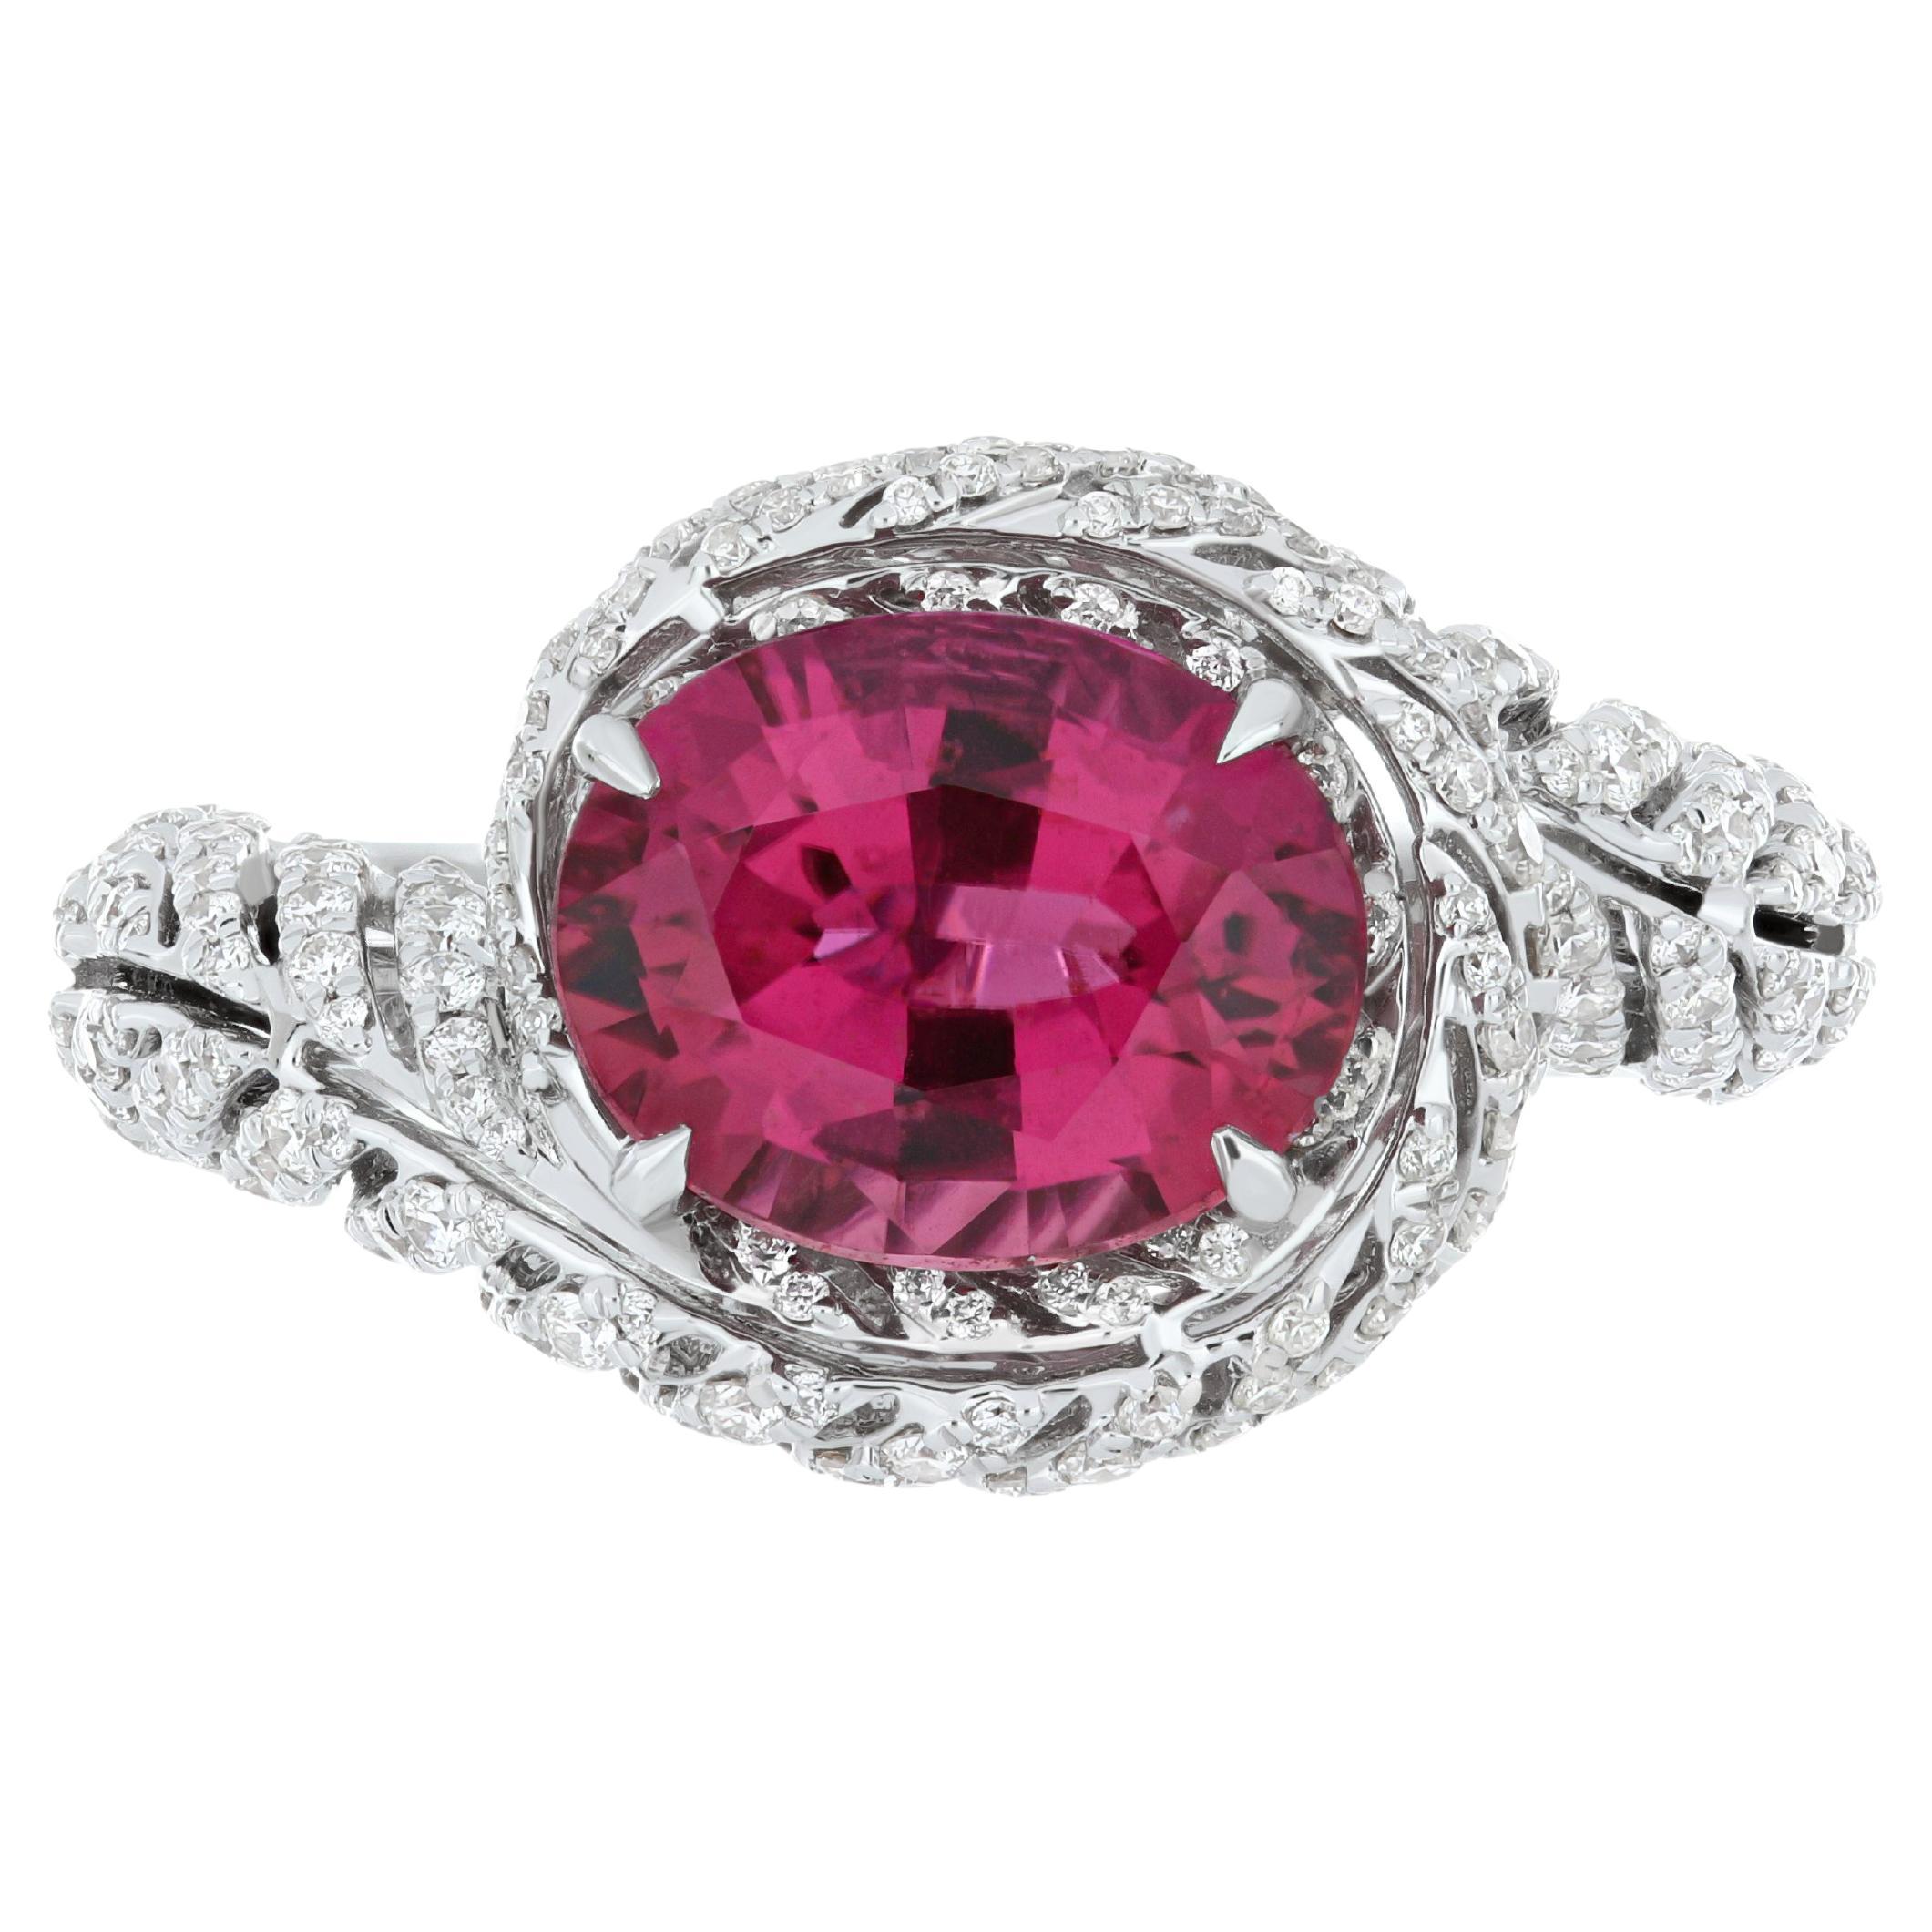 3.2 Carat Rubellite and Diamond Studded Ring in 18K White Gold Ring For Sale